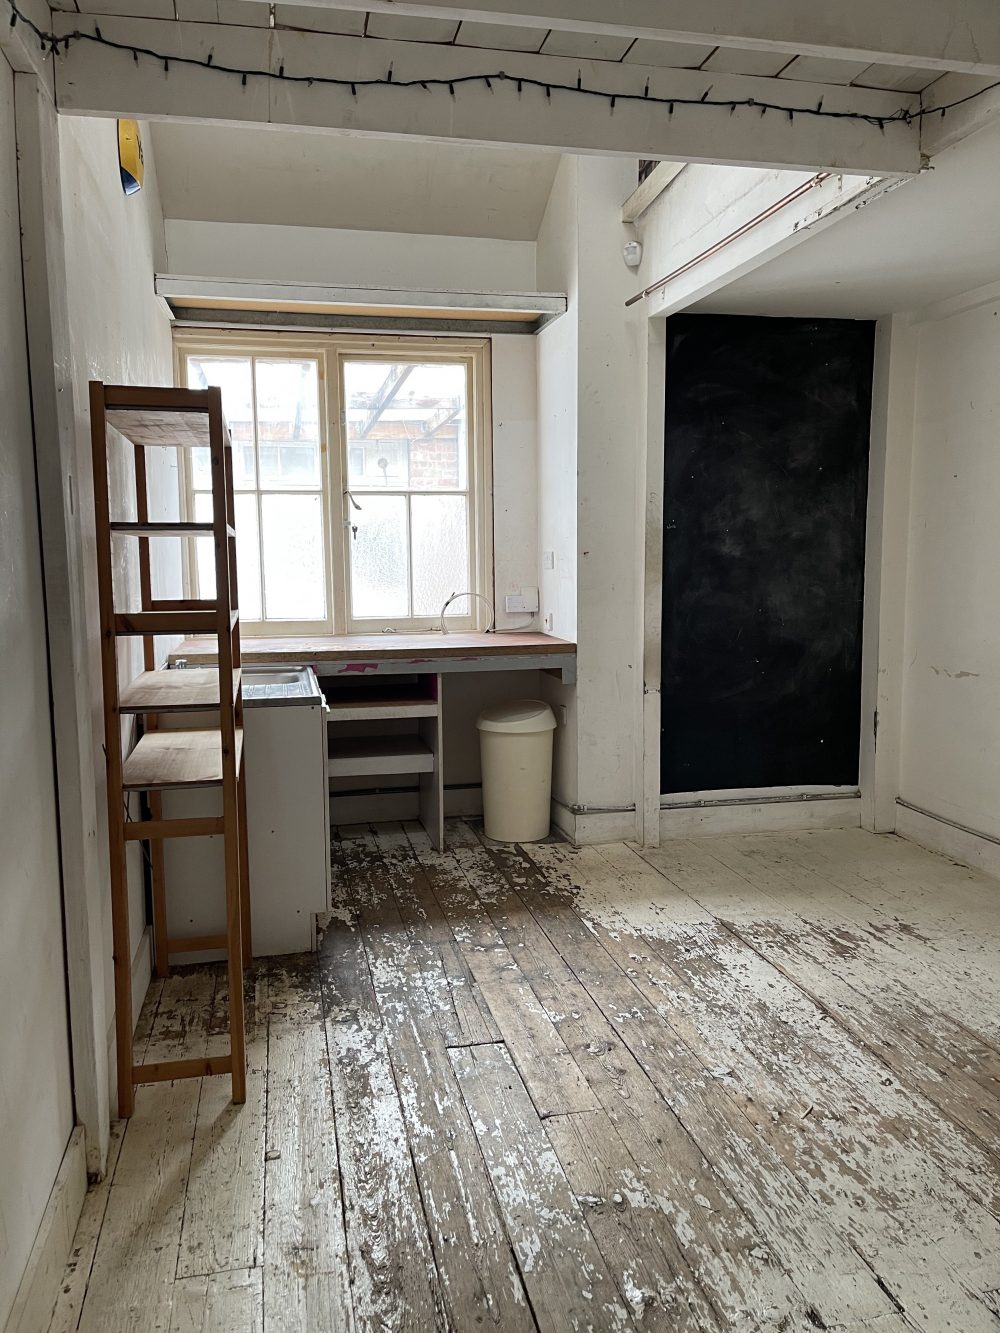 Creative Art Studio Available To rent in N16 Shelfrod Place London Unit 51 Pic13